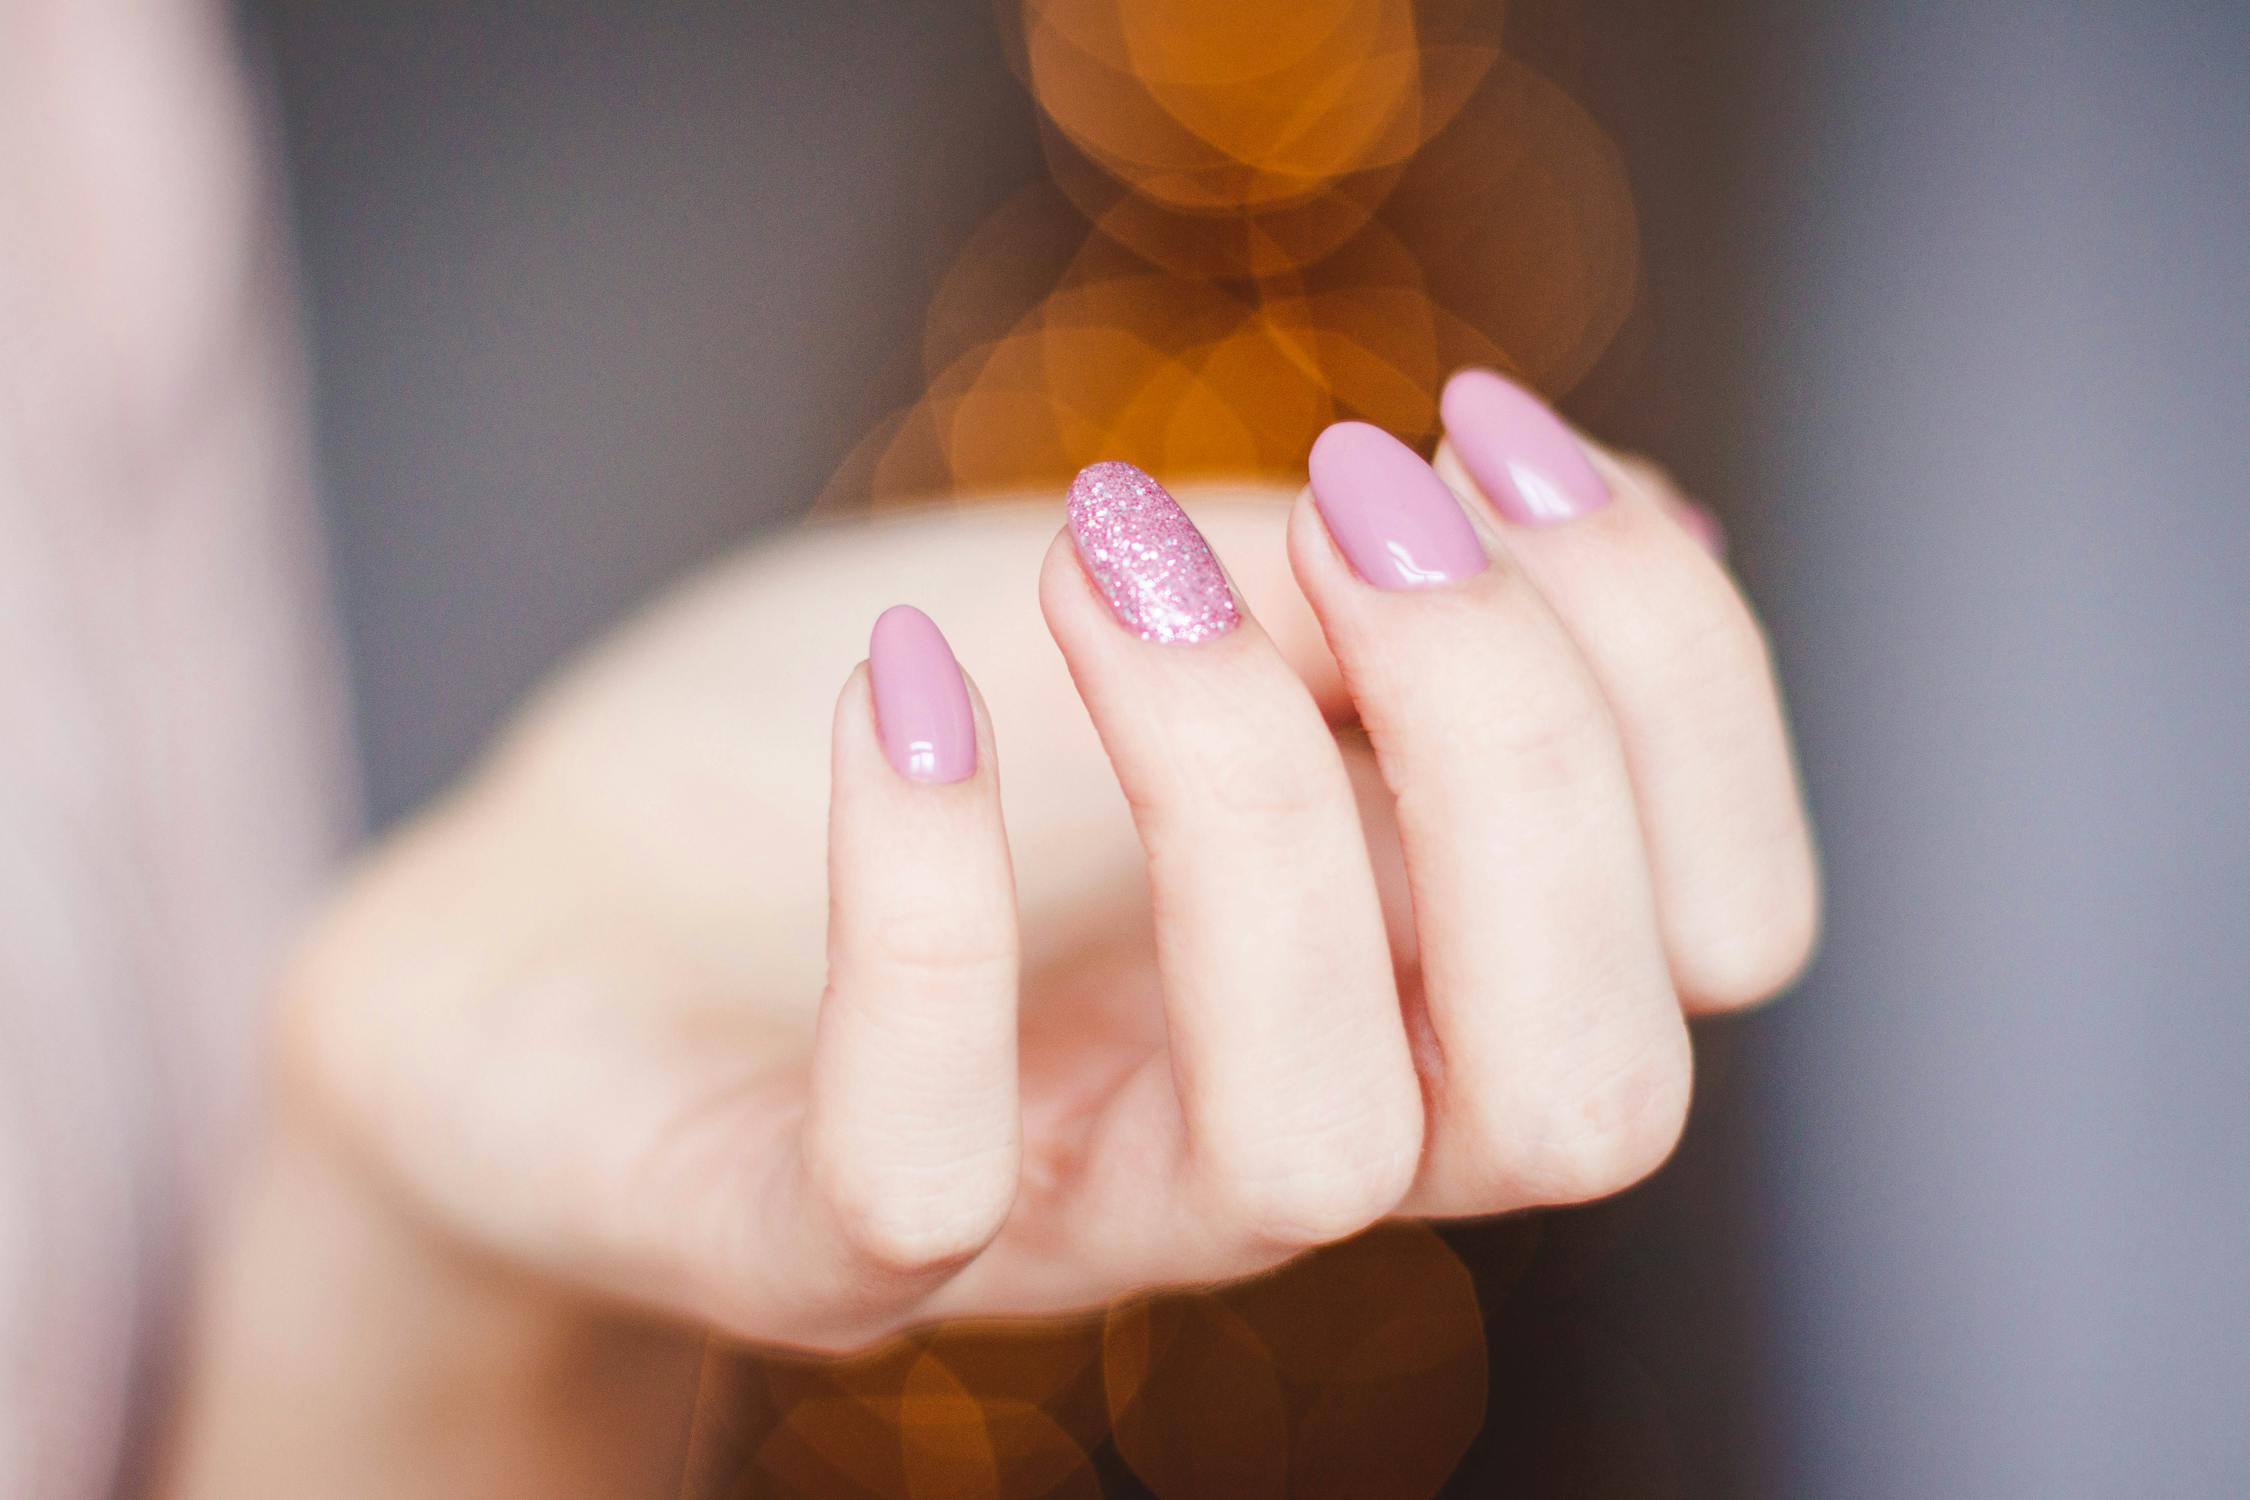 5 Ways to Strengthen Your Nails After Removing Acrylics, Straight